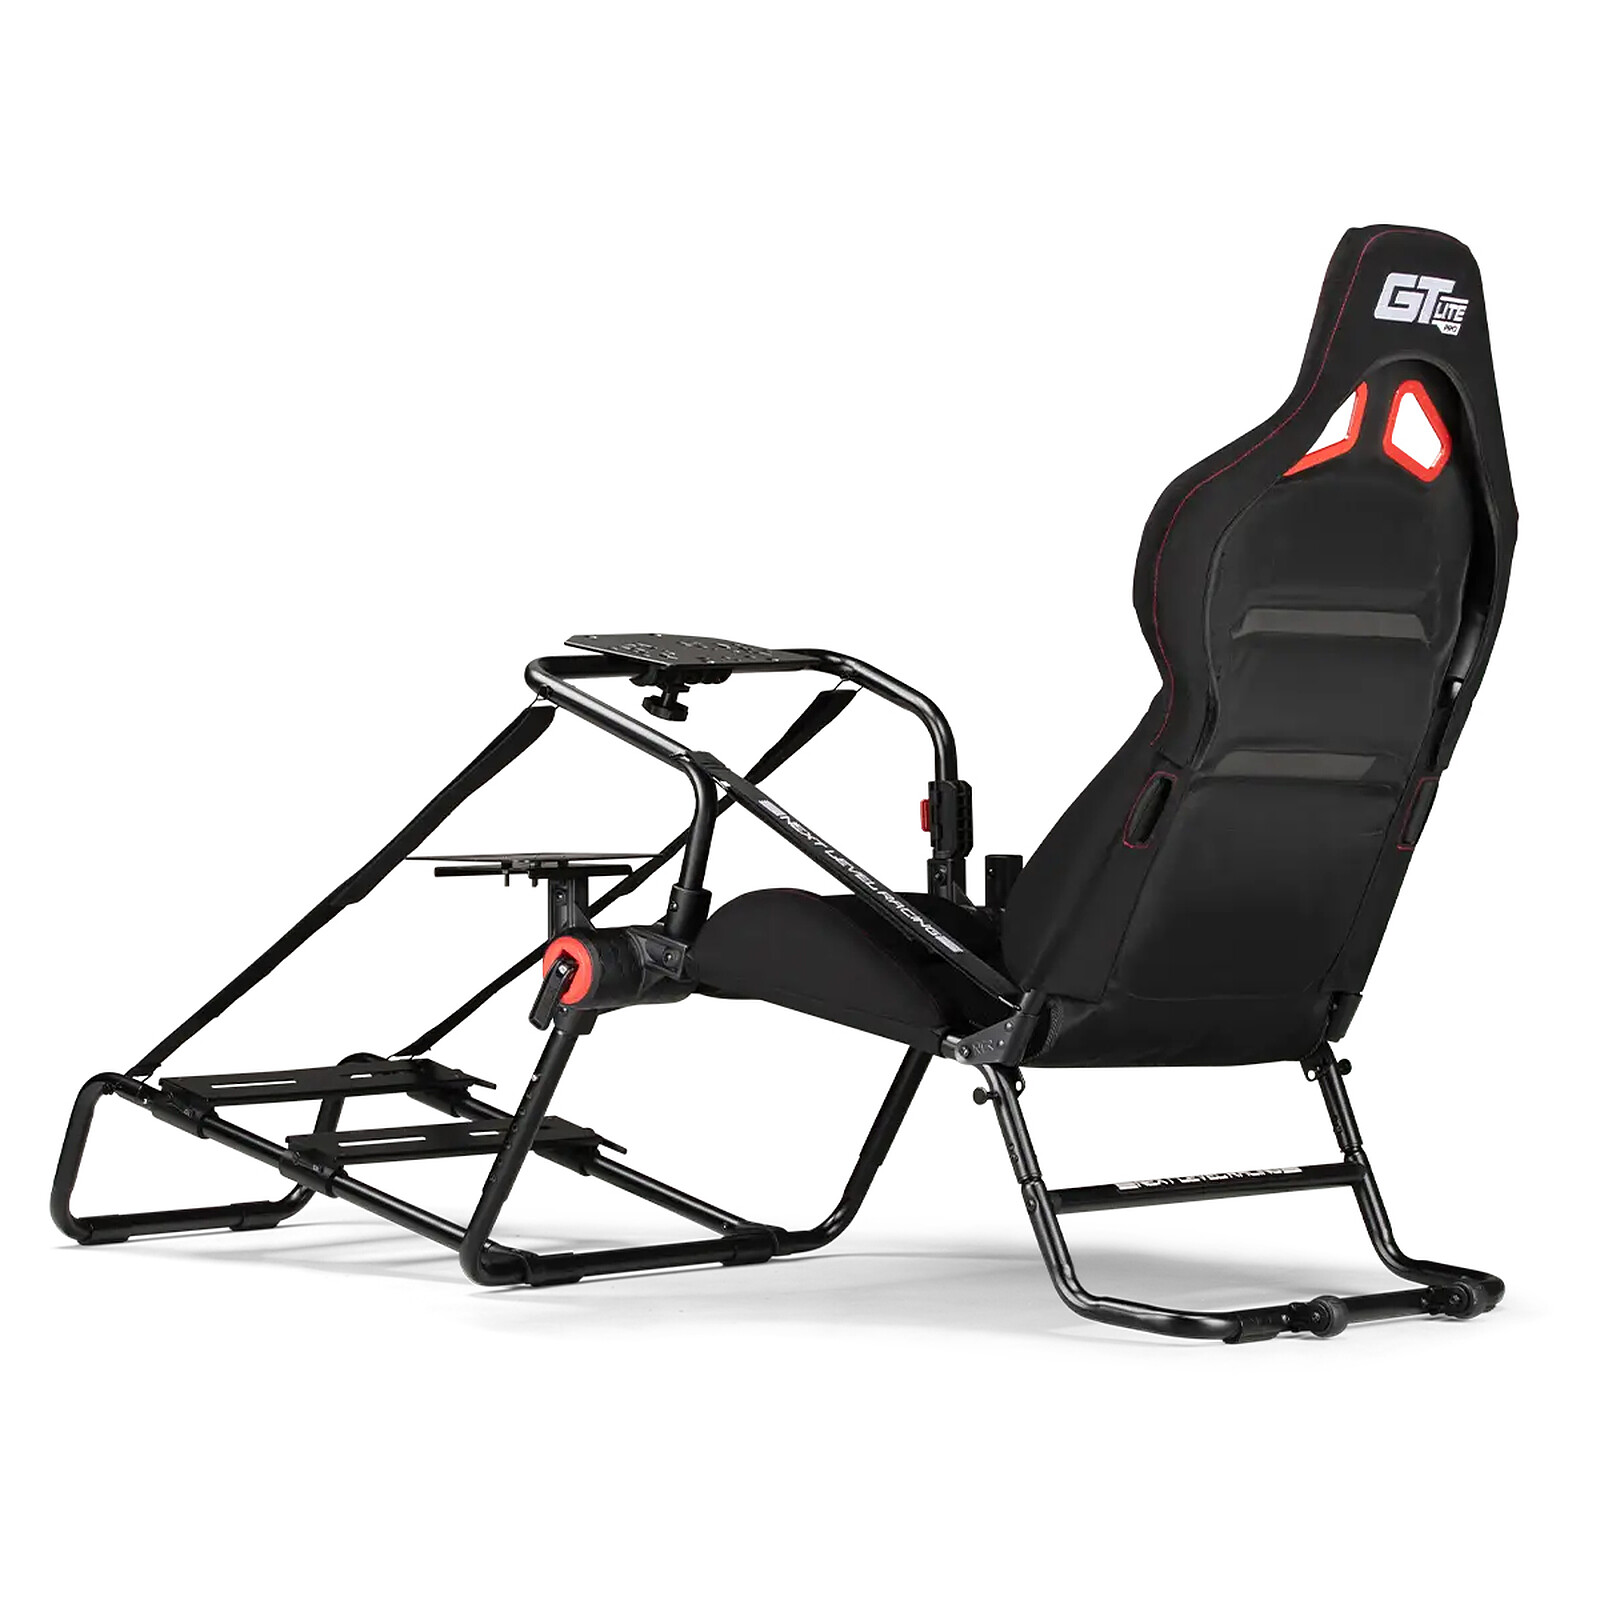 Next Level Racing GT Lite Pro - Other gaming accessories - LDLC 3-year  warranty